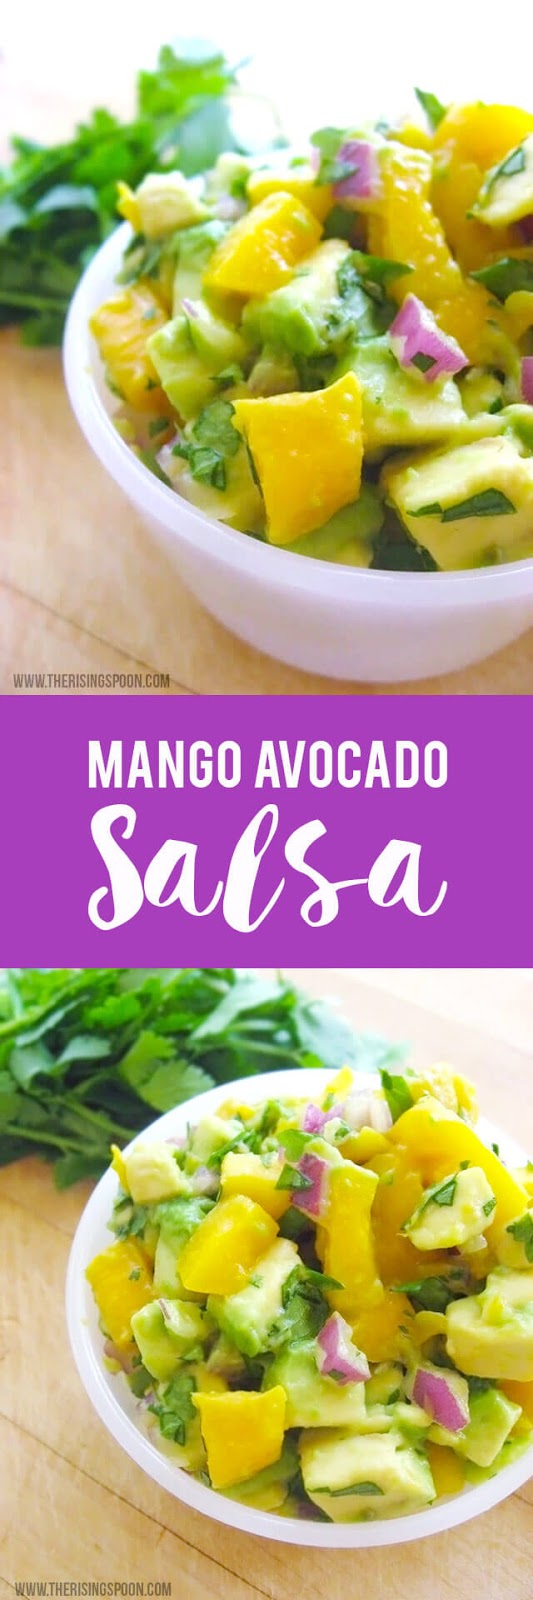 Want to learn how to make mango avocado salsa? It only takes a few simple and ripe ingredients to create a fresh, flavorful salsa that's perfect as a dip, and topping for cooked meats and veggies.